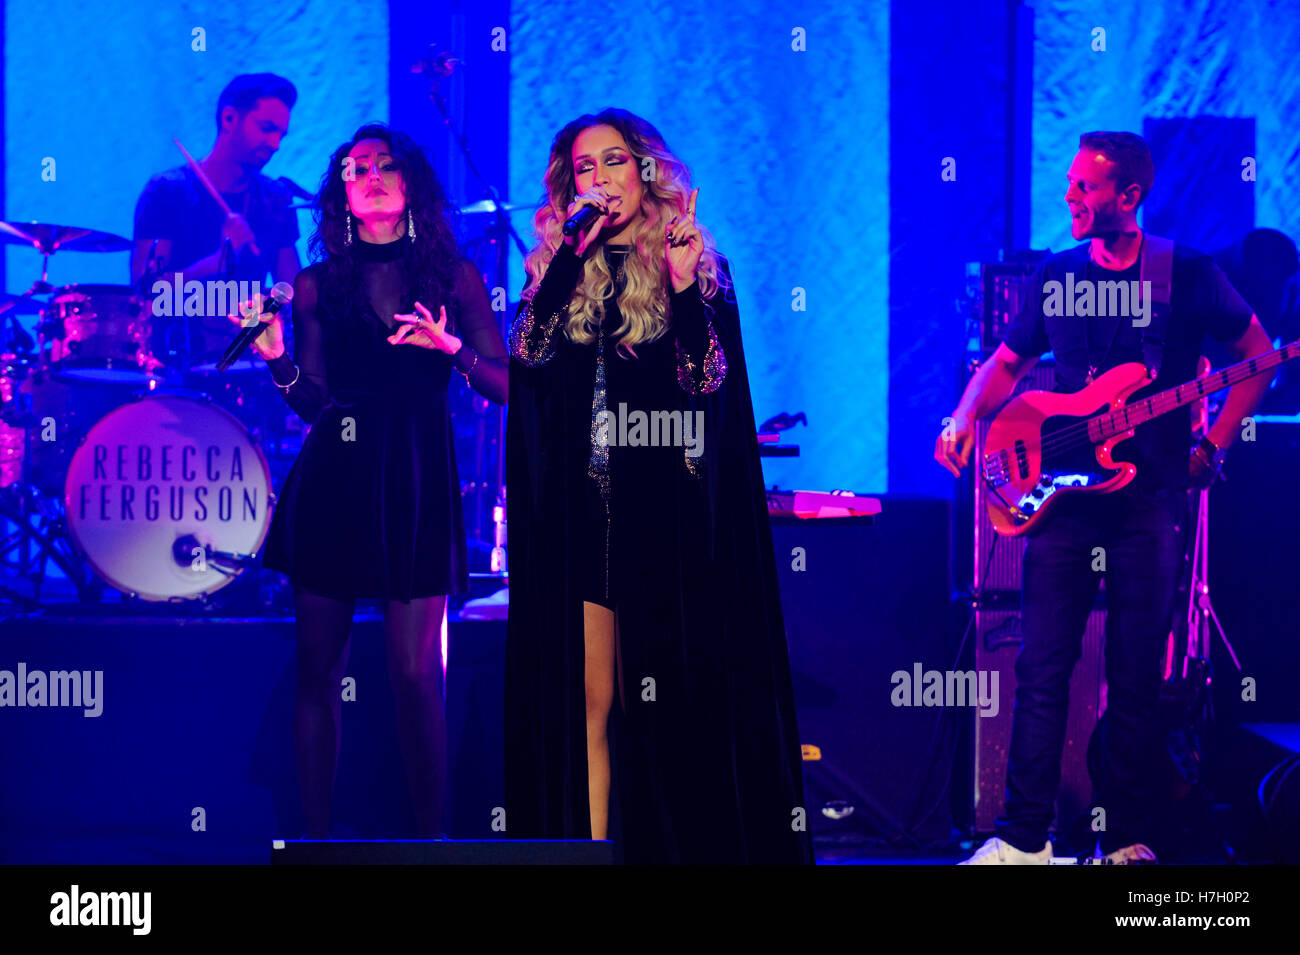 Liverpool, UK. 4th November 2016. Singer and former X Factor runner up, Rebecca Ferguson, performs her homecoming show, to a sellout audience, at the Liverpool Philharmonic Hall as part of her UK 'Superwoman' tour. © Paul Warburton Stock Photo